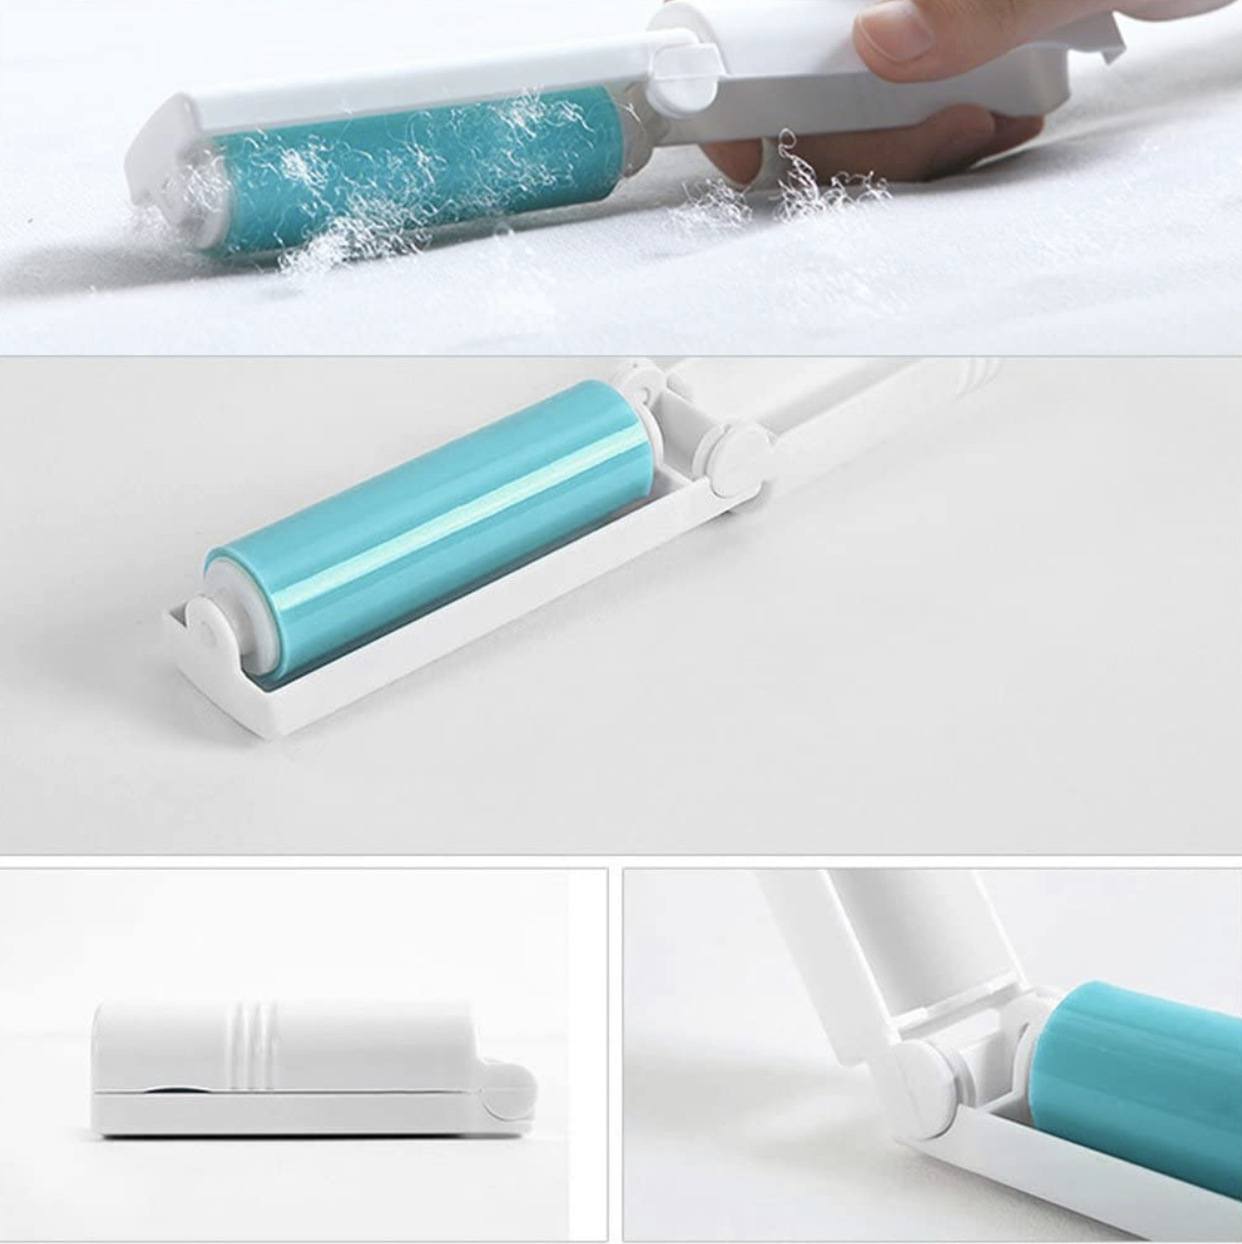 (New Year Hot Sale- 49% OFF) Washable Foldable Hair Remover- Buy 4 Free Shipping